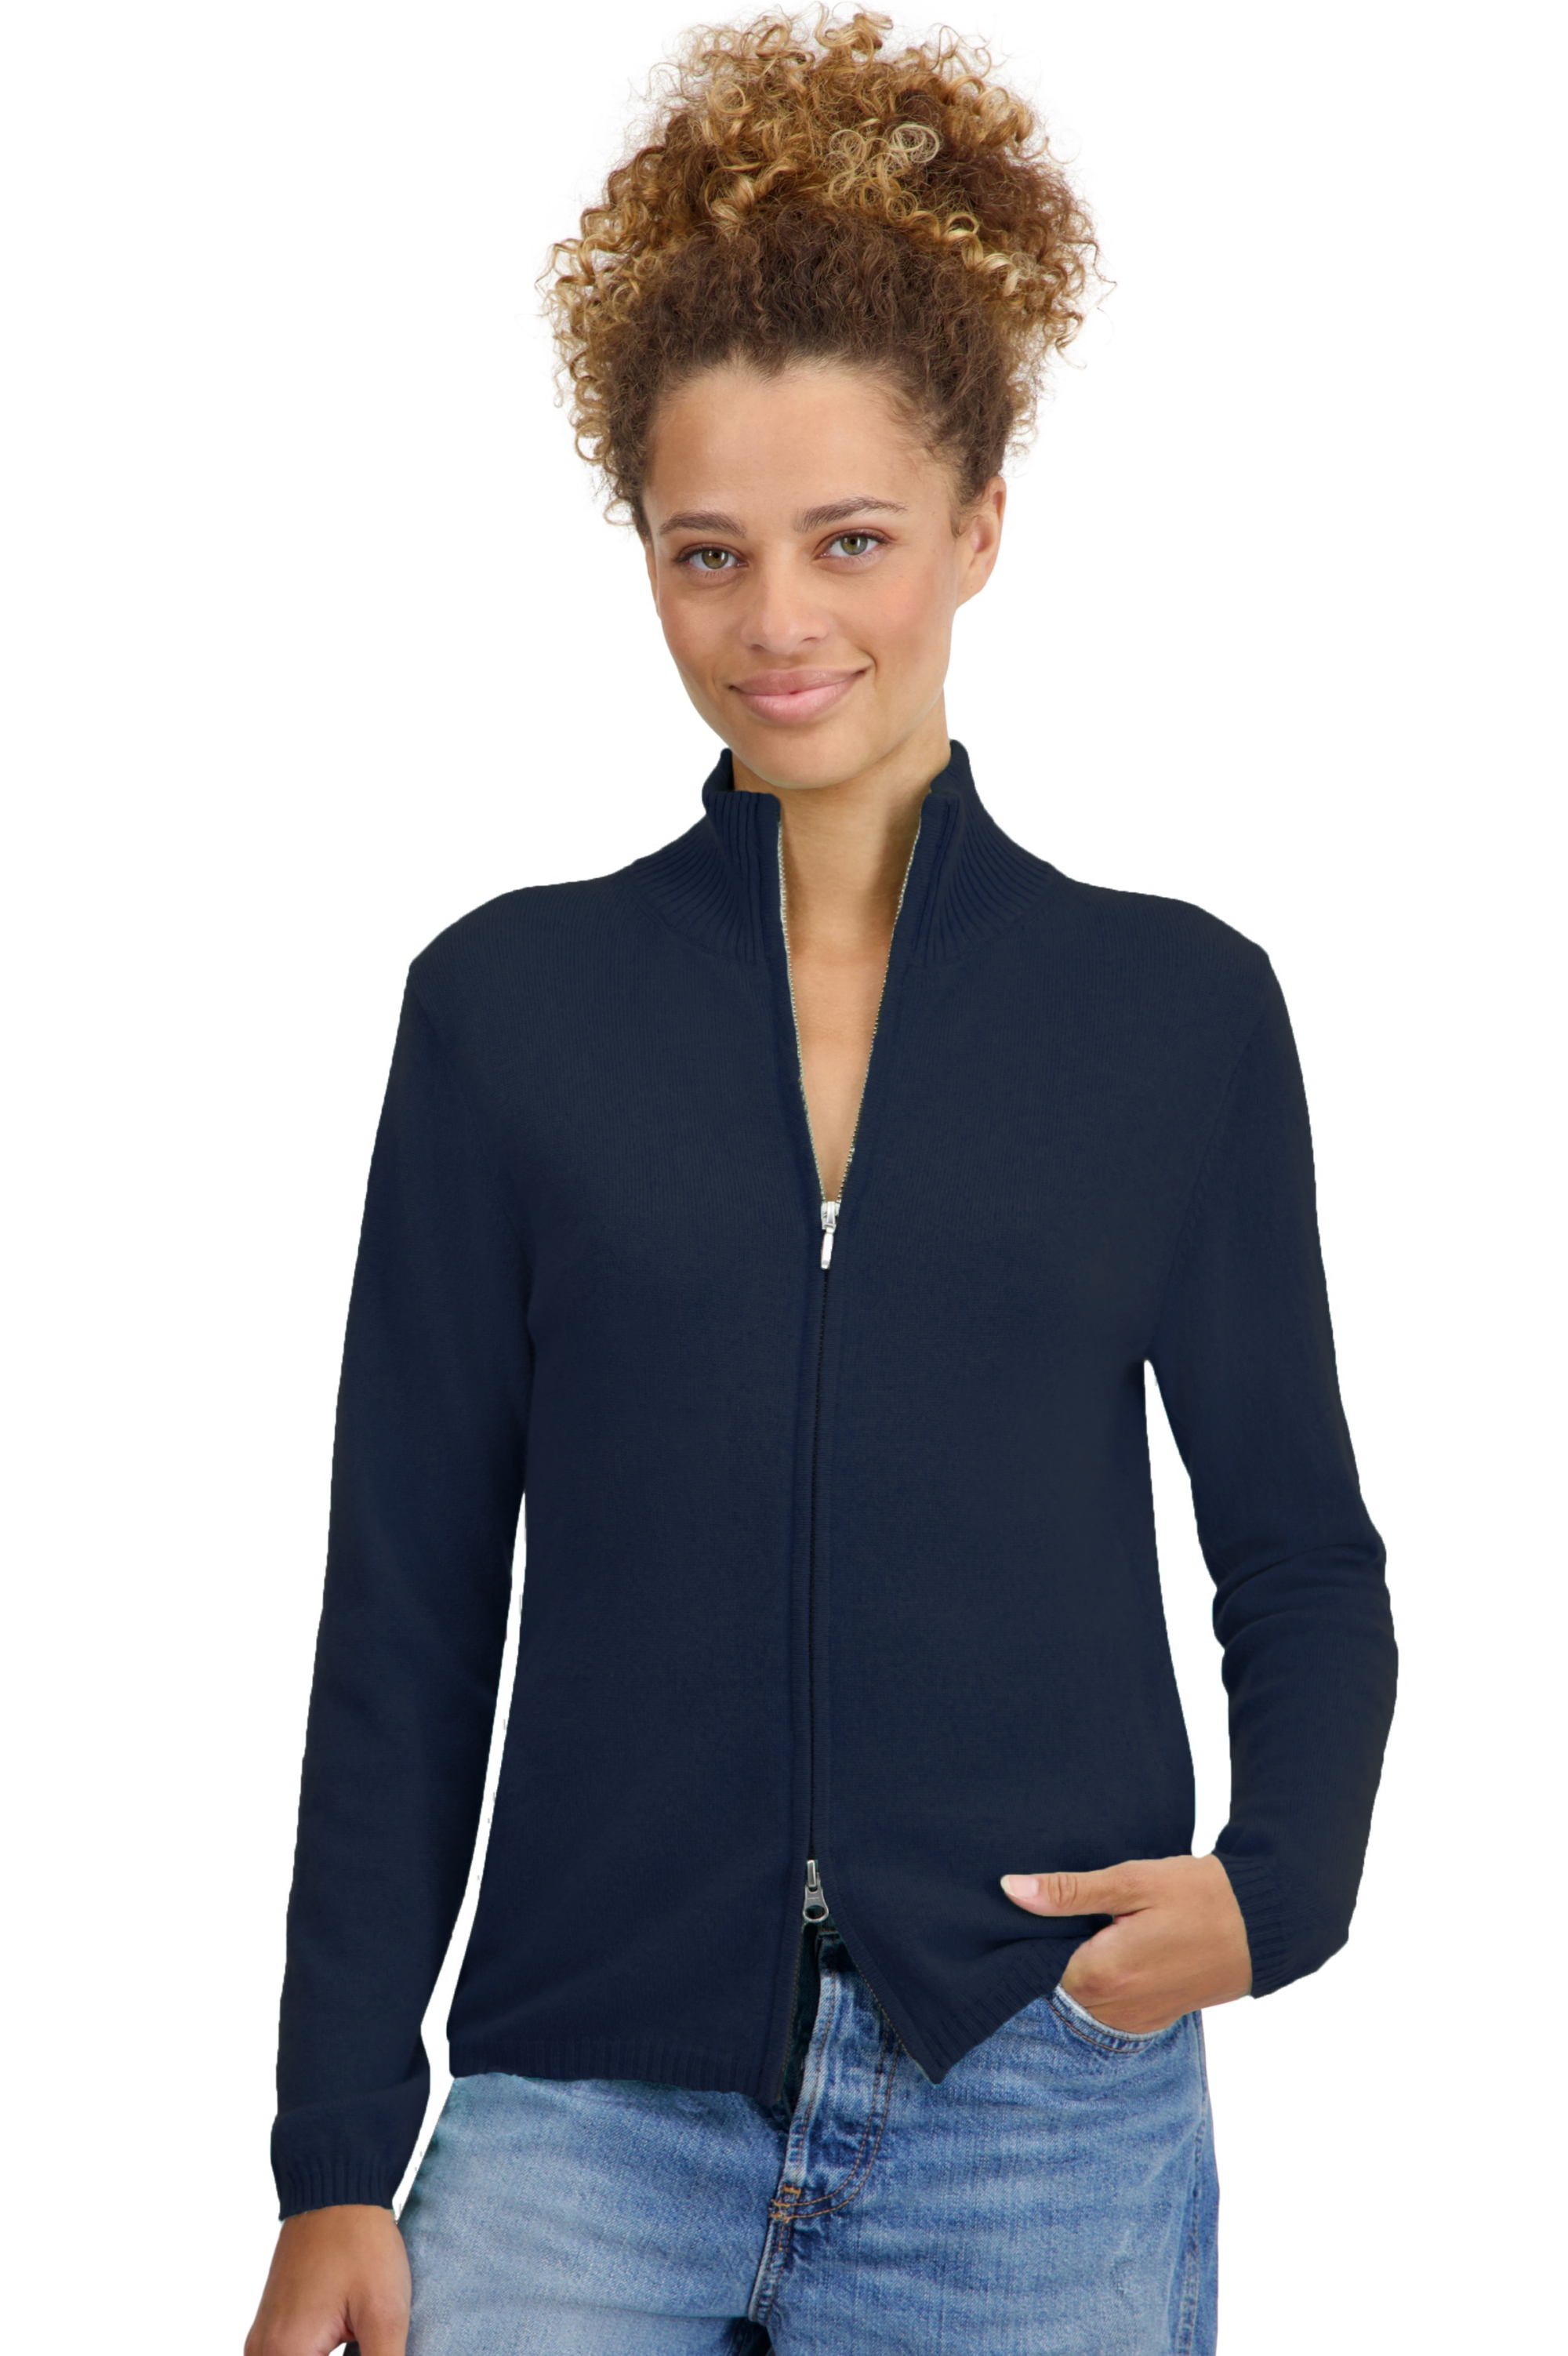 Cashmere ladies basic sweaters at low prices thames first dress blue s